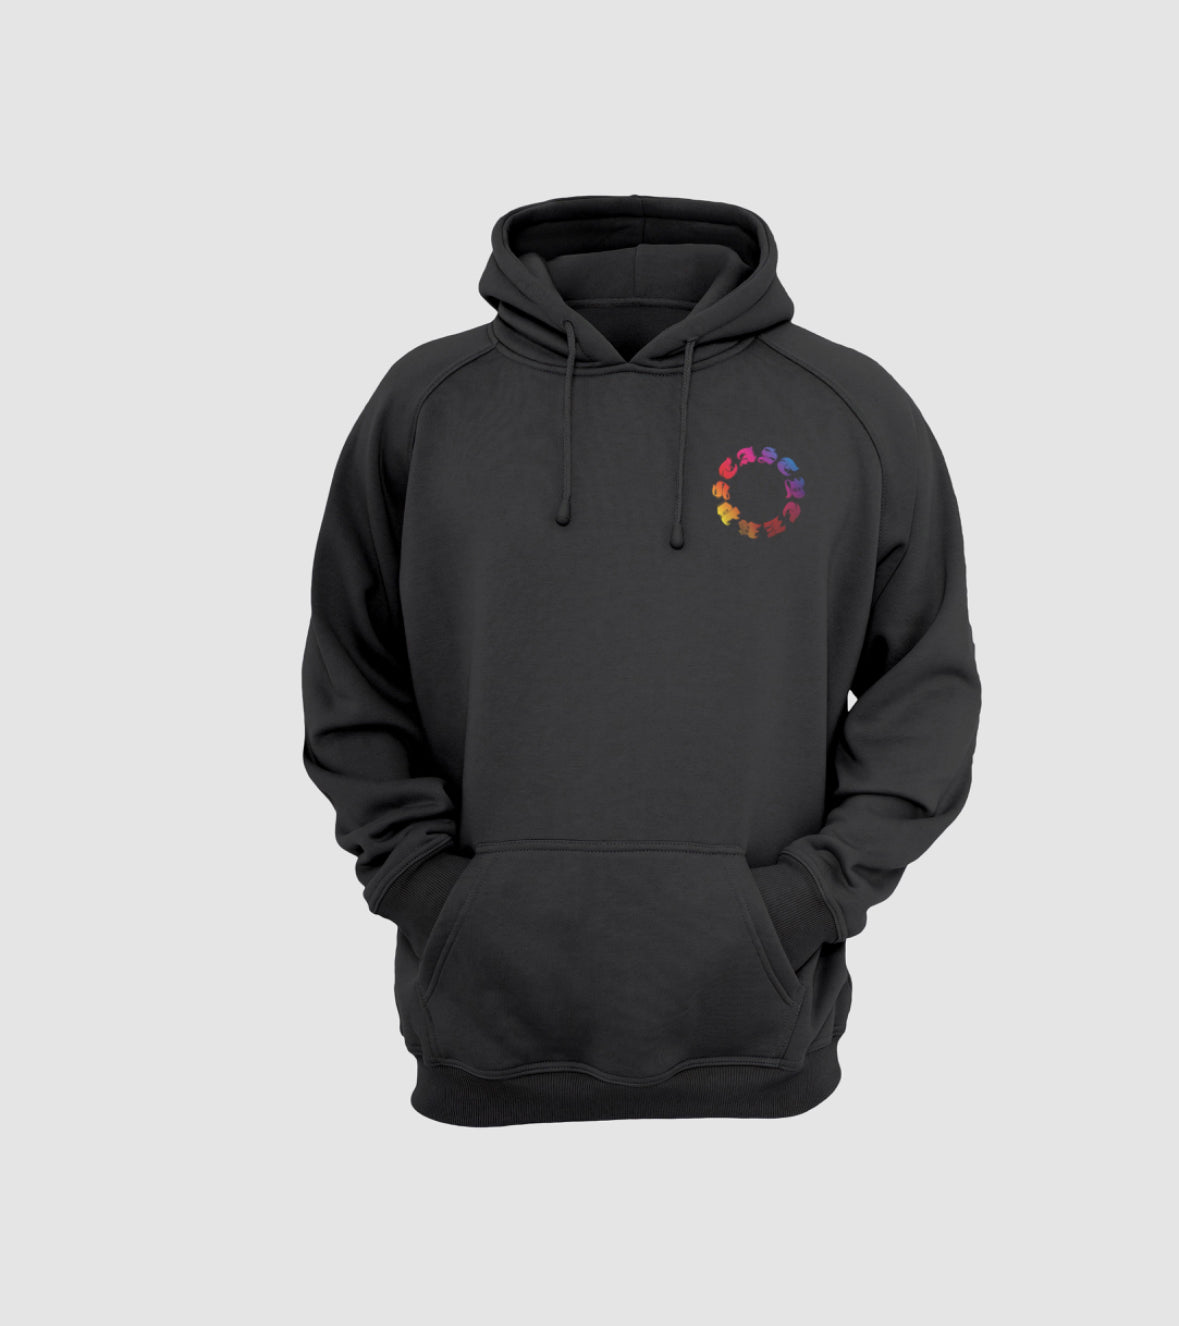 Tivenchy  - Black Hoodie SOLD OUT